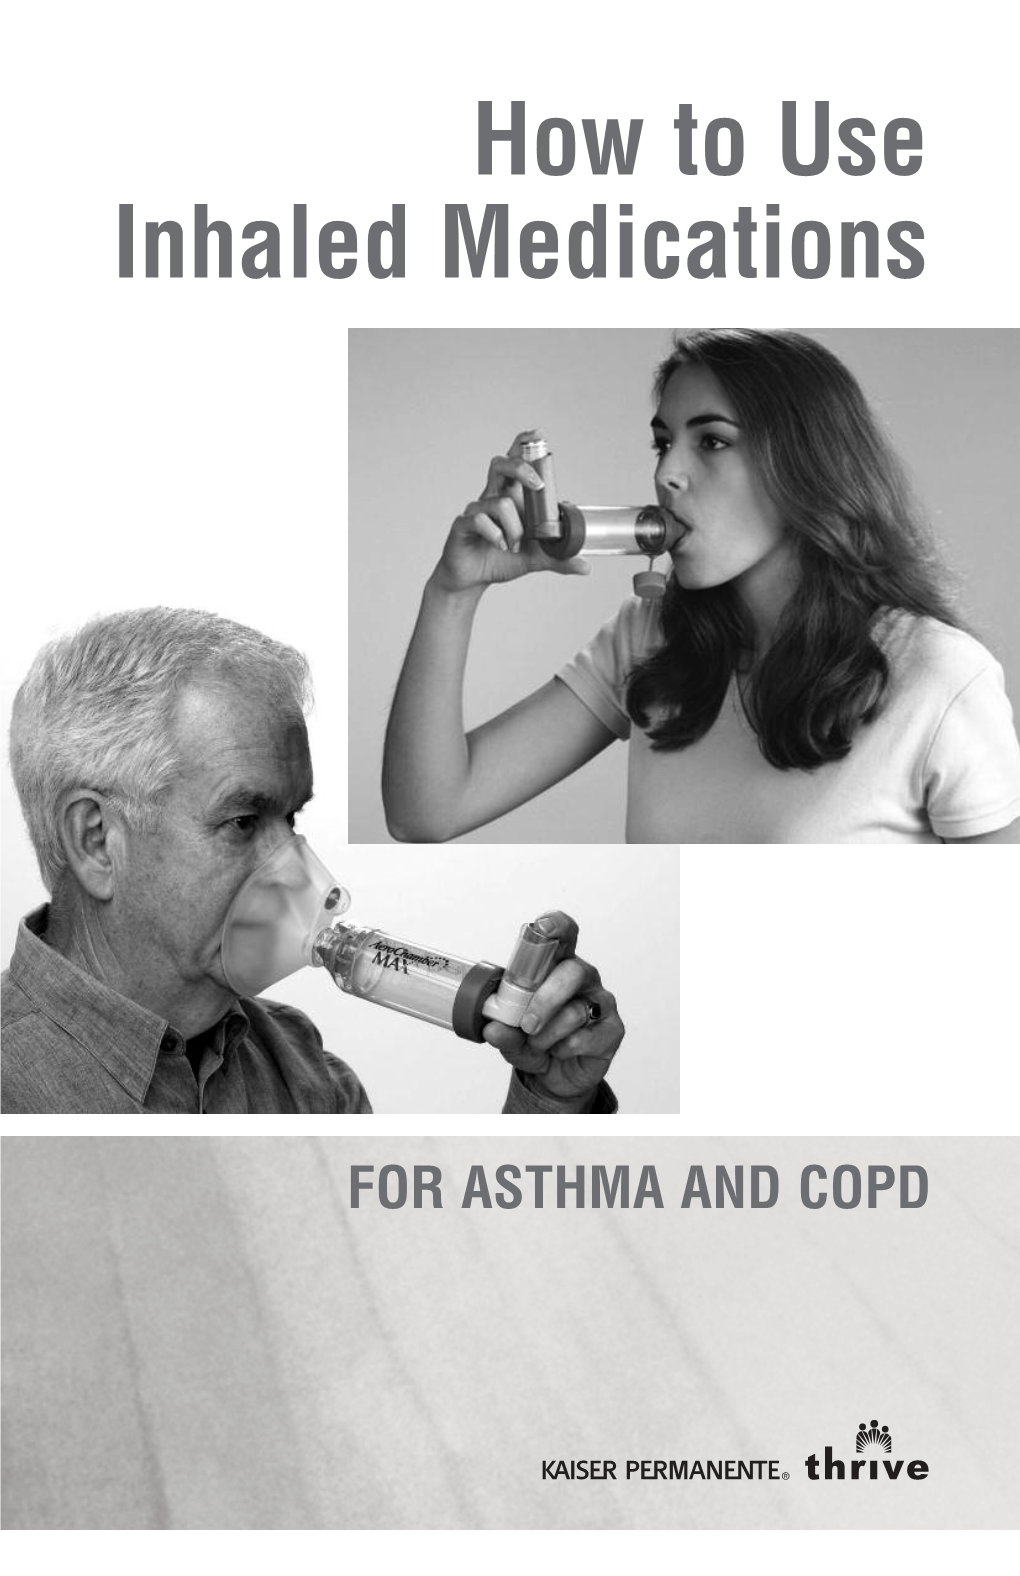 Asthma and COPD: How to Use Inhaled Medications